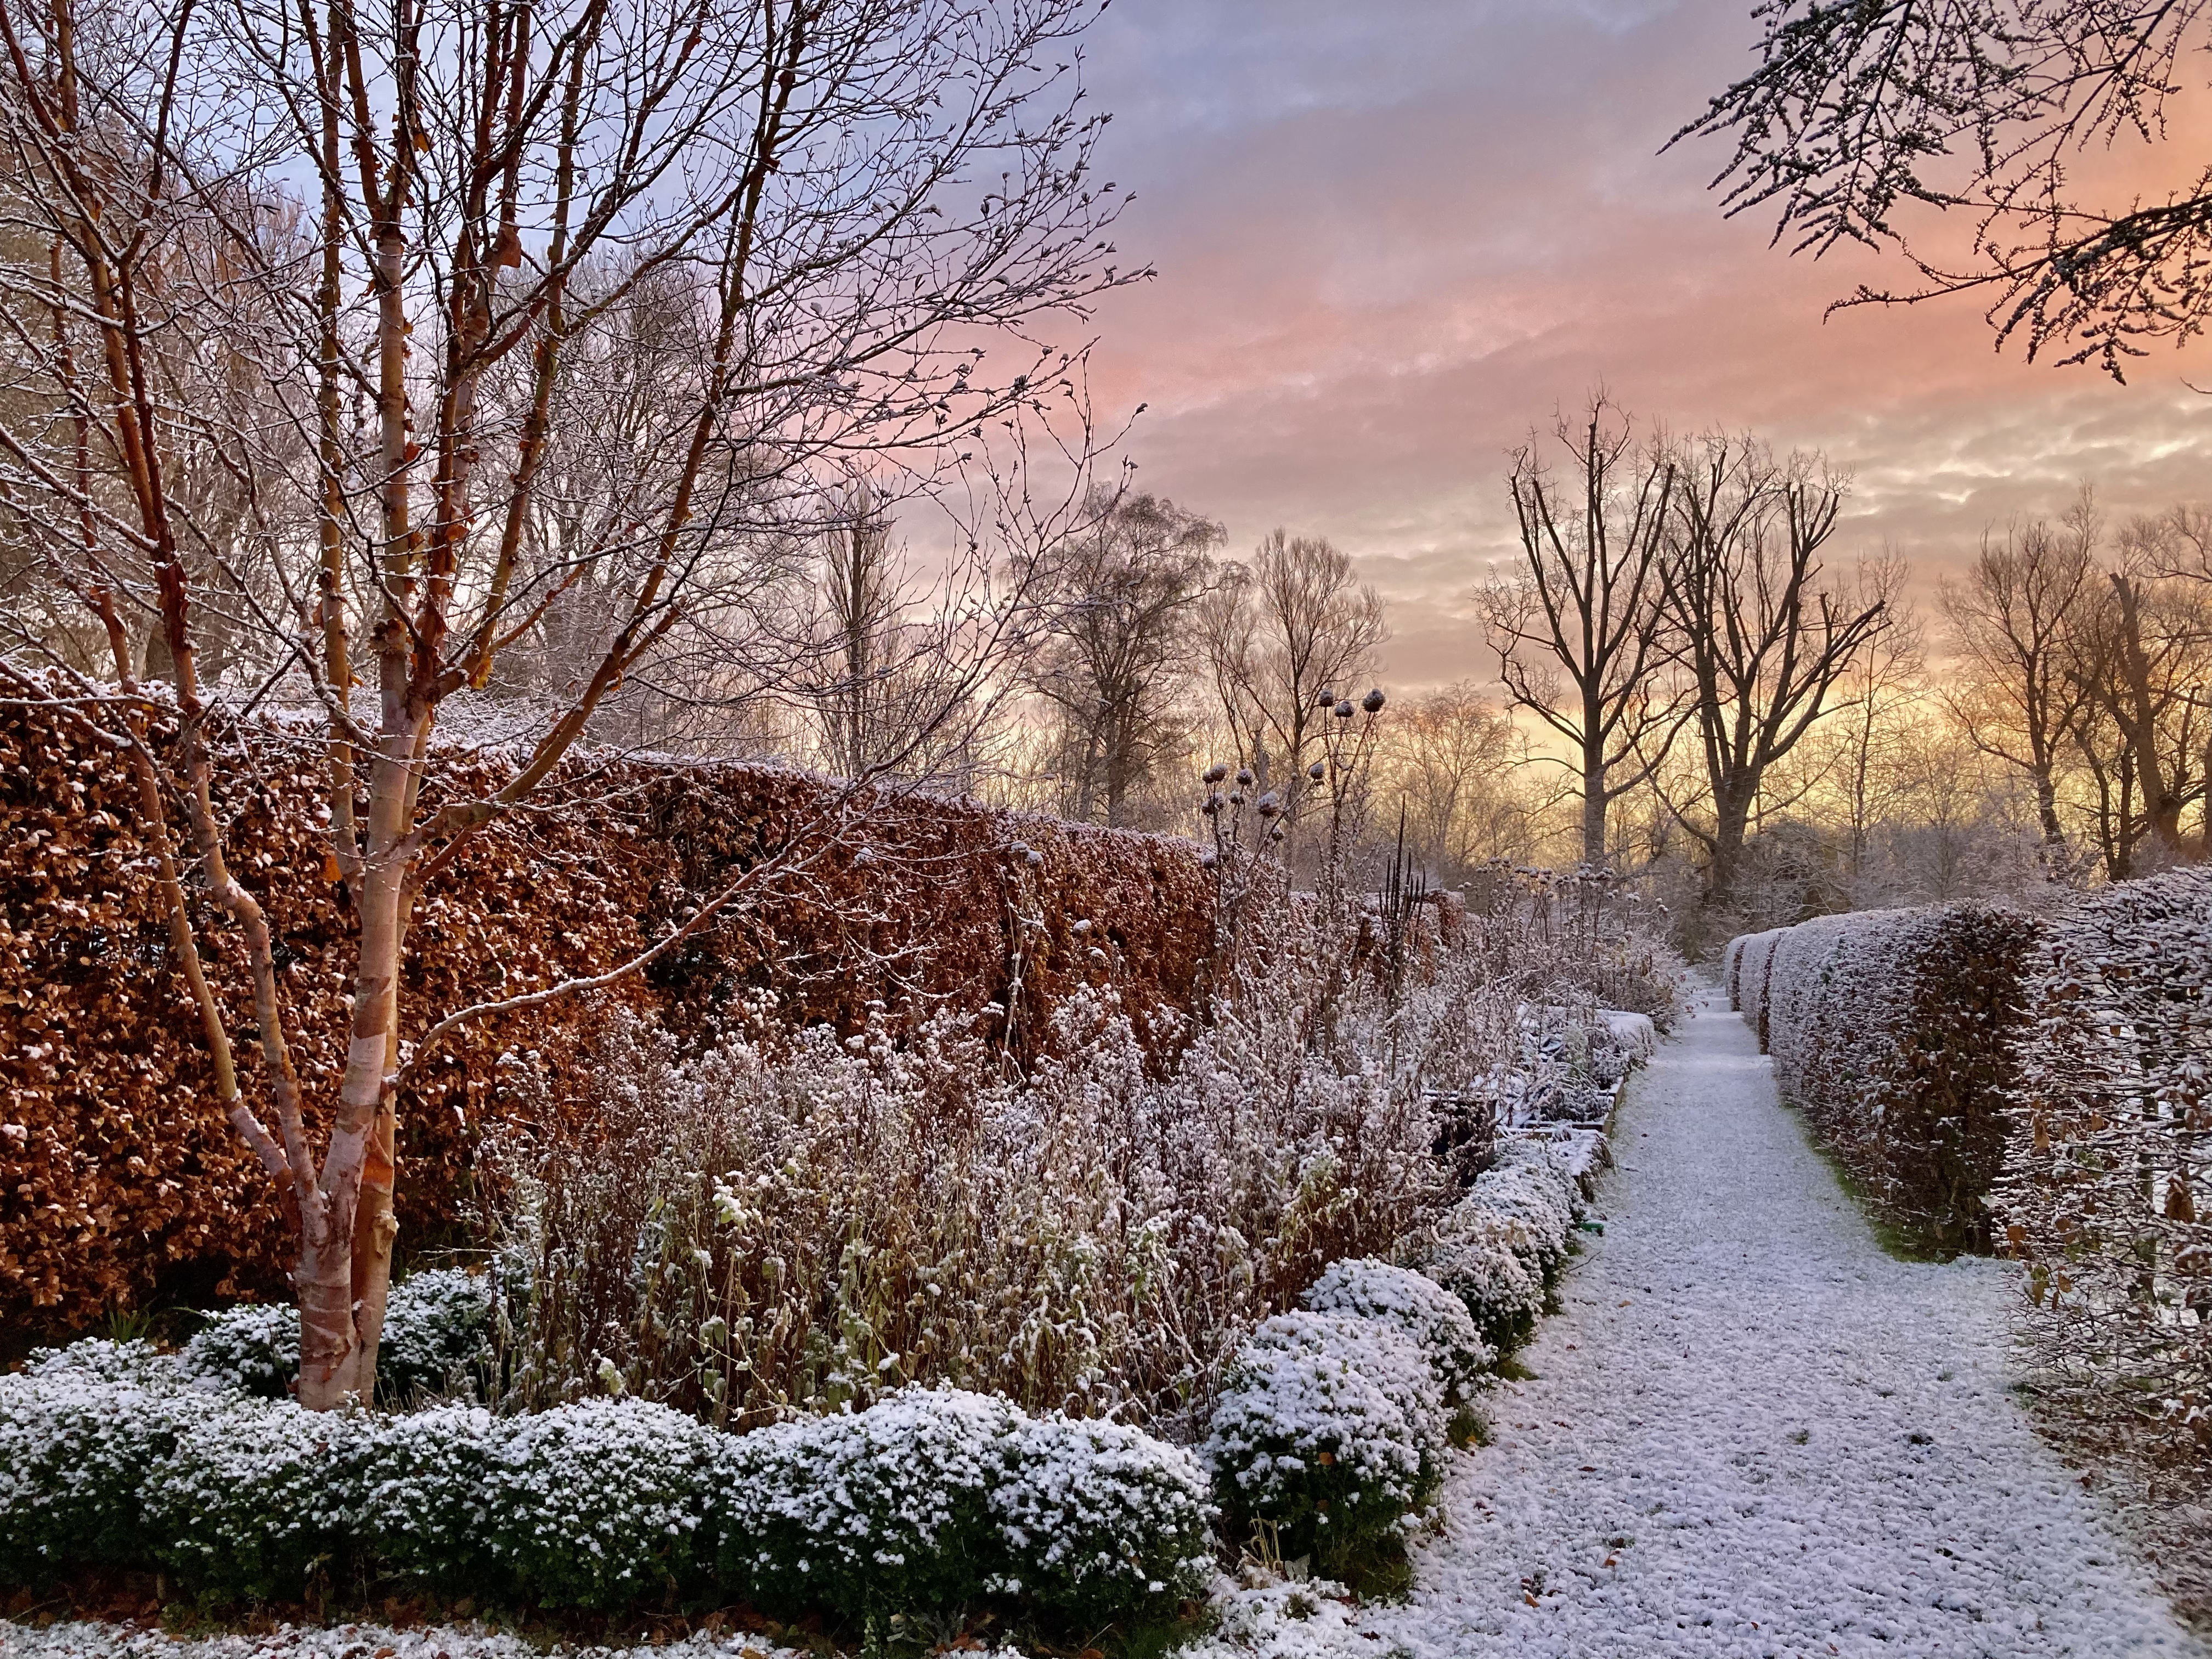 Photo by Chelsea Wallis - LMH gardens in the snow with a colourful sky